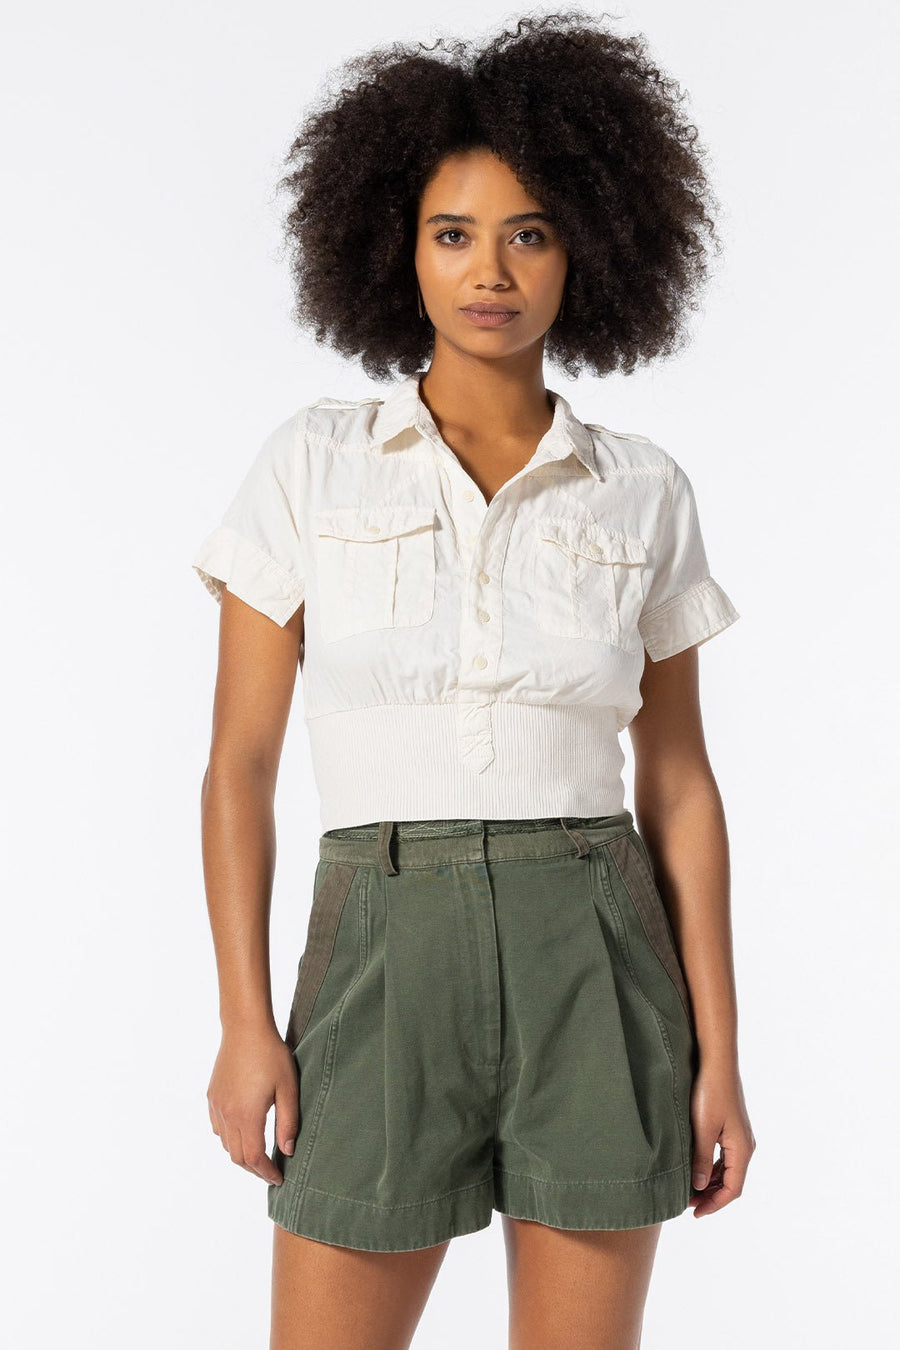 SERENGETI SHORT SLEEVE BUTTON DOWN TOP, NATURAL - Burning Torch Online Boutique